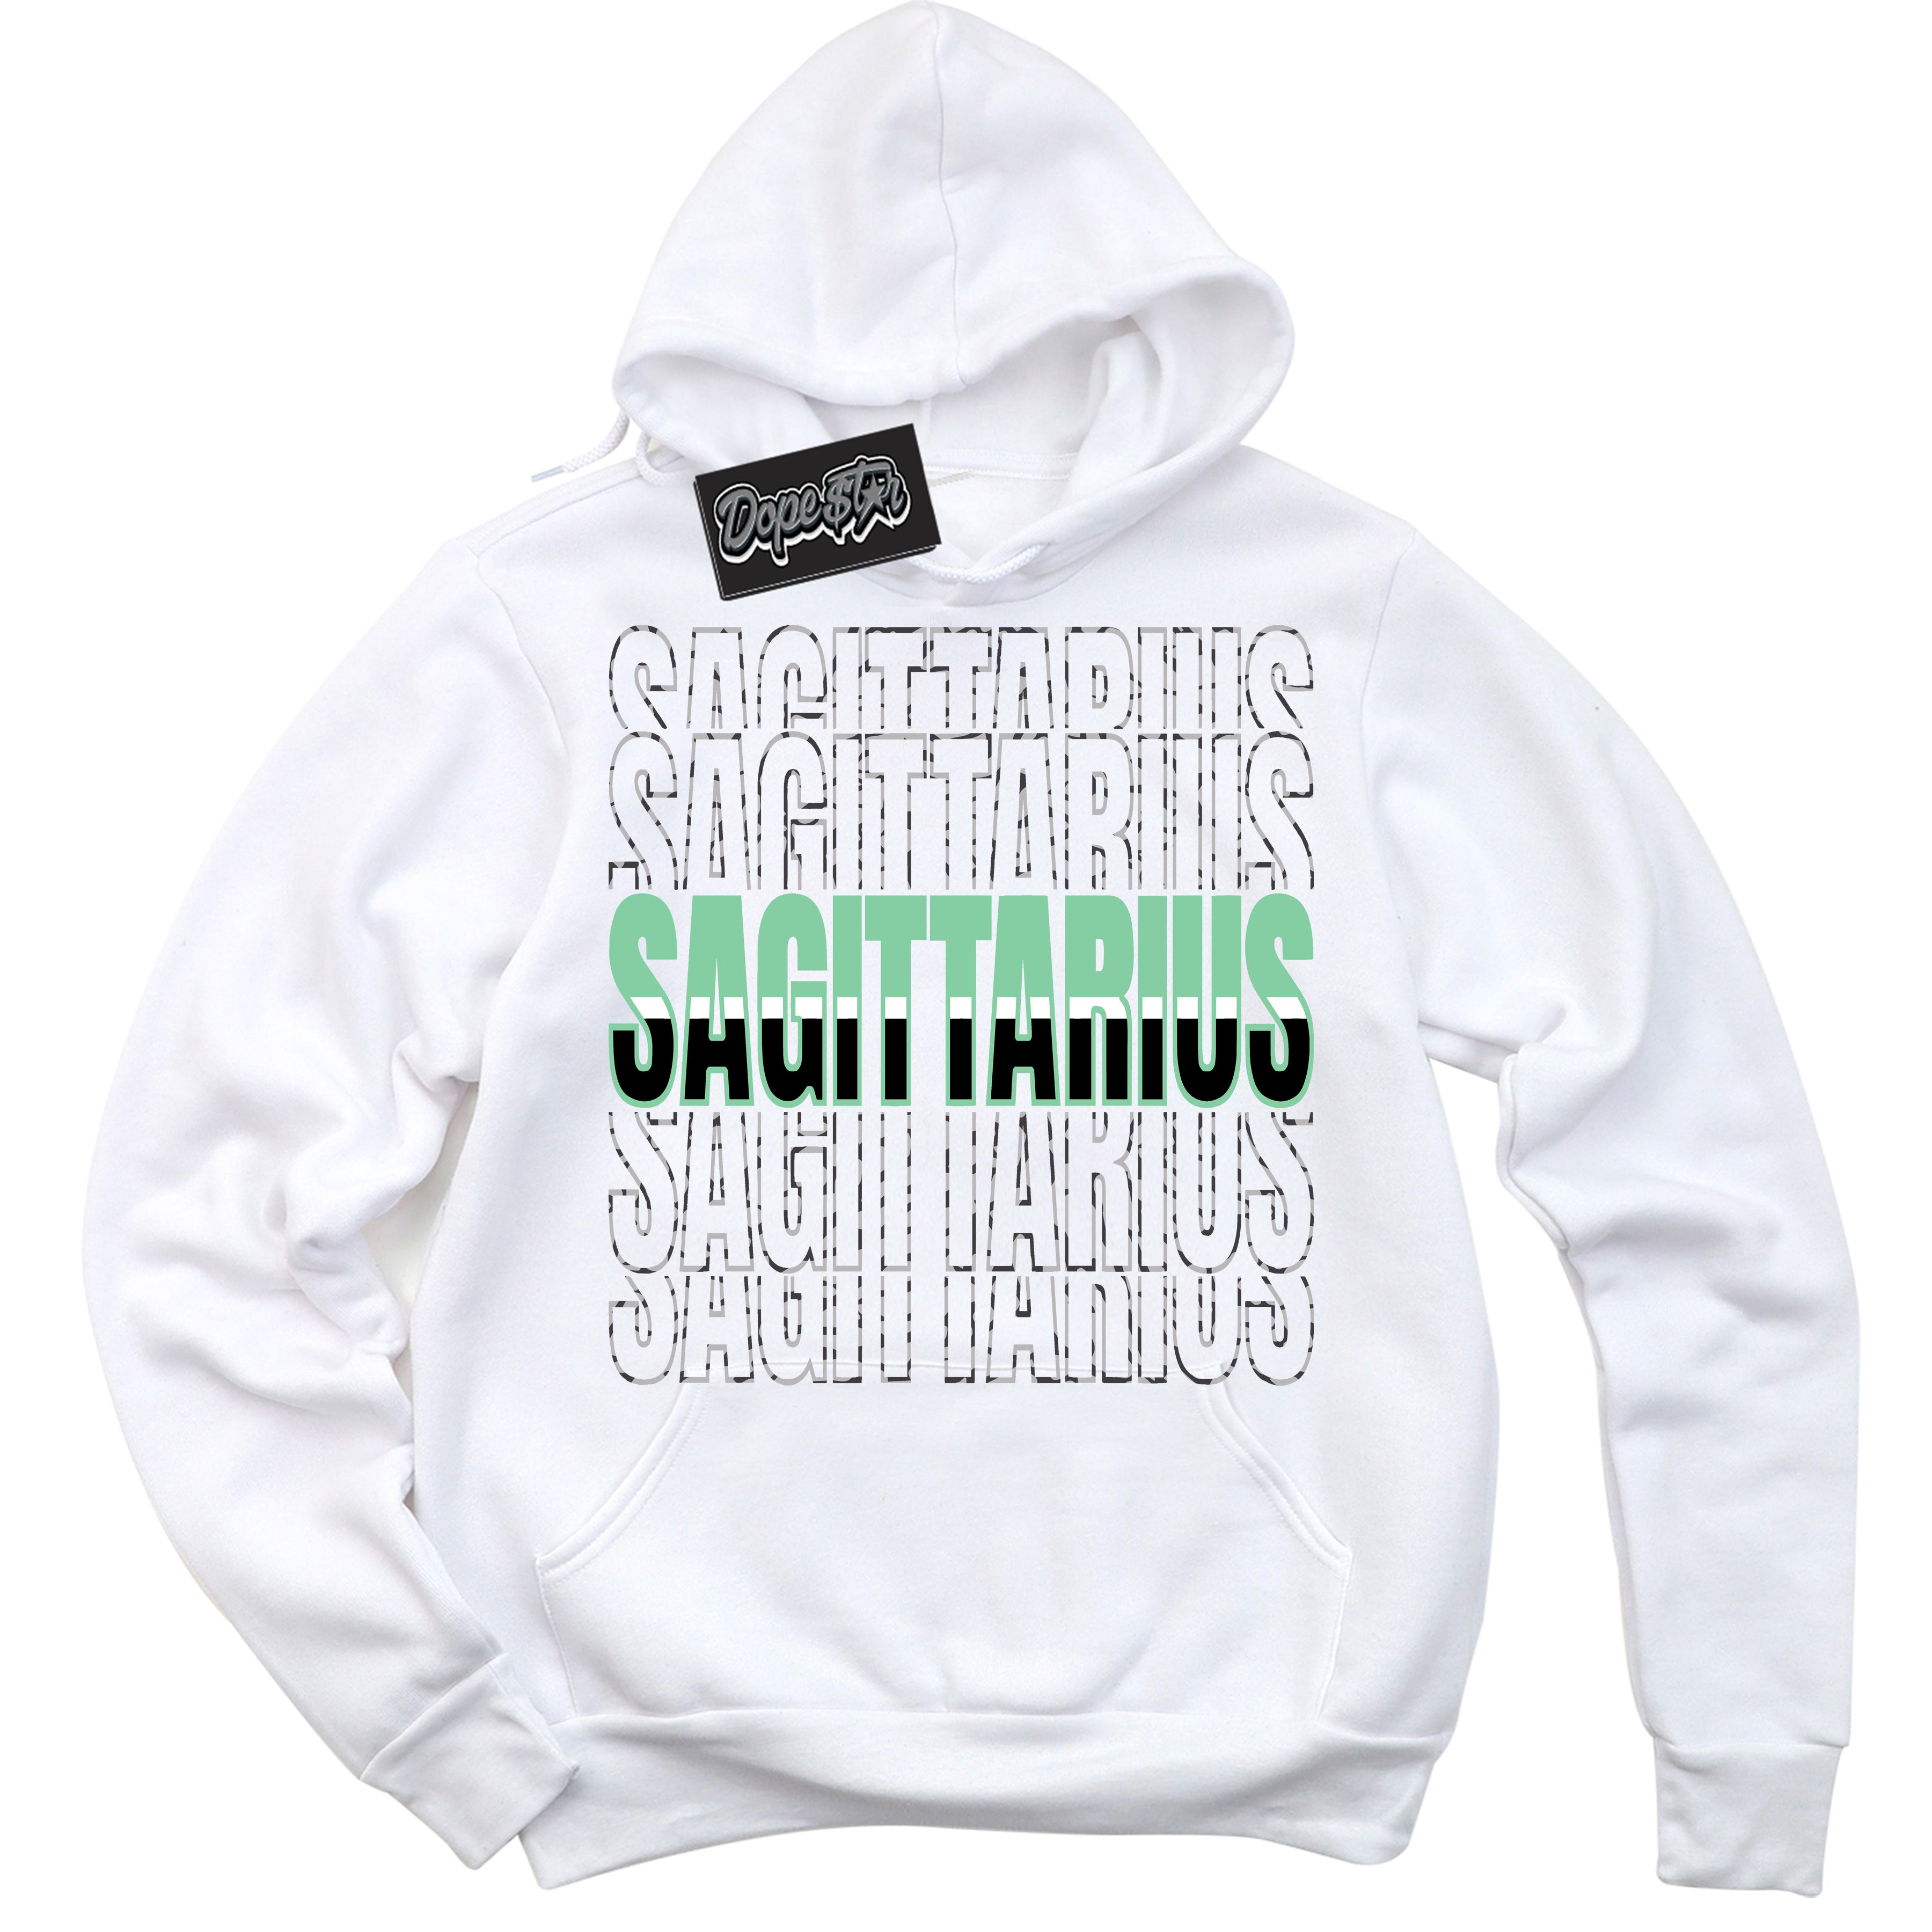 Cool White Graphic DopeStar Hoodie with “ Sagittarius “ print, that perfectly matches Green Glow 3s sneakers